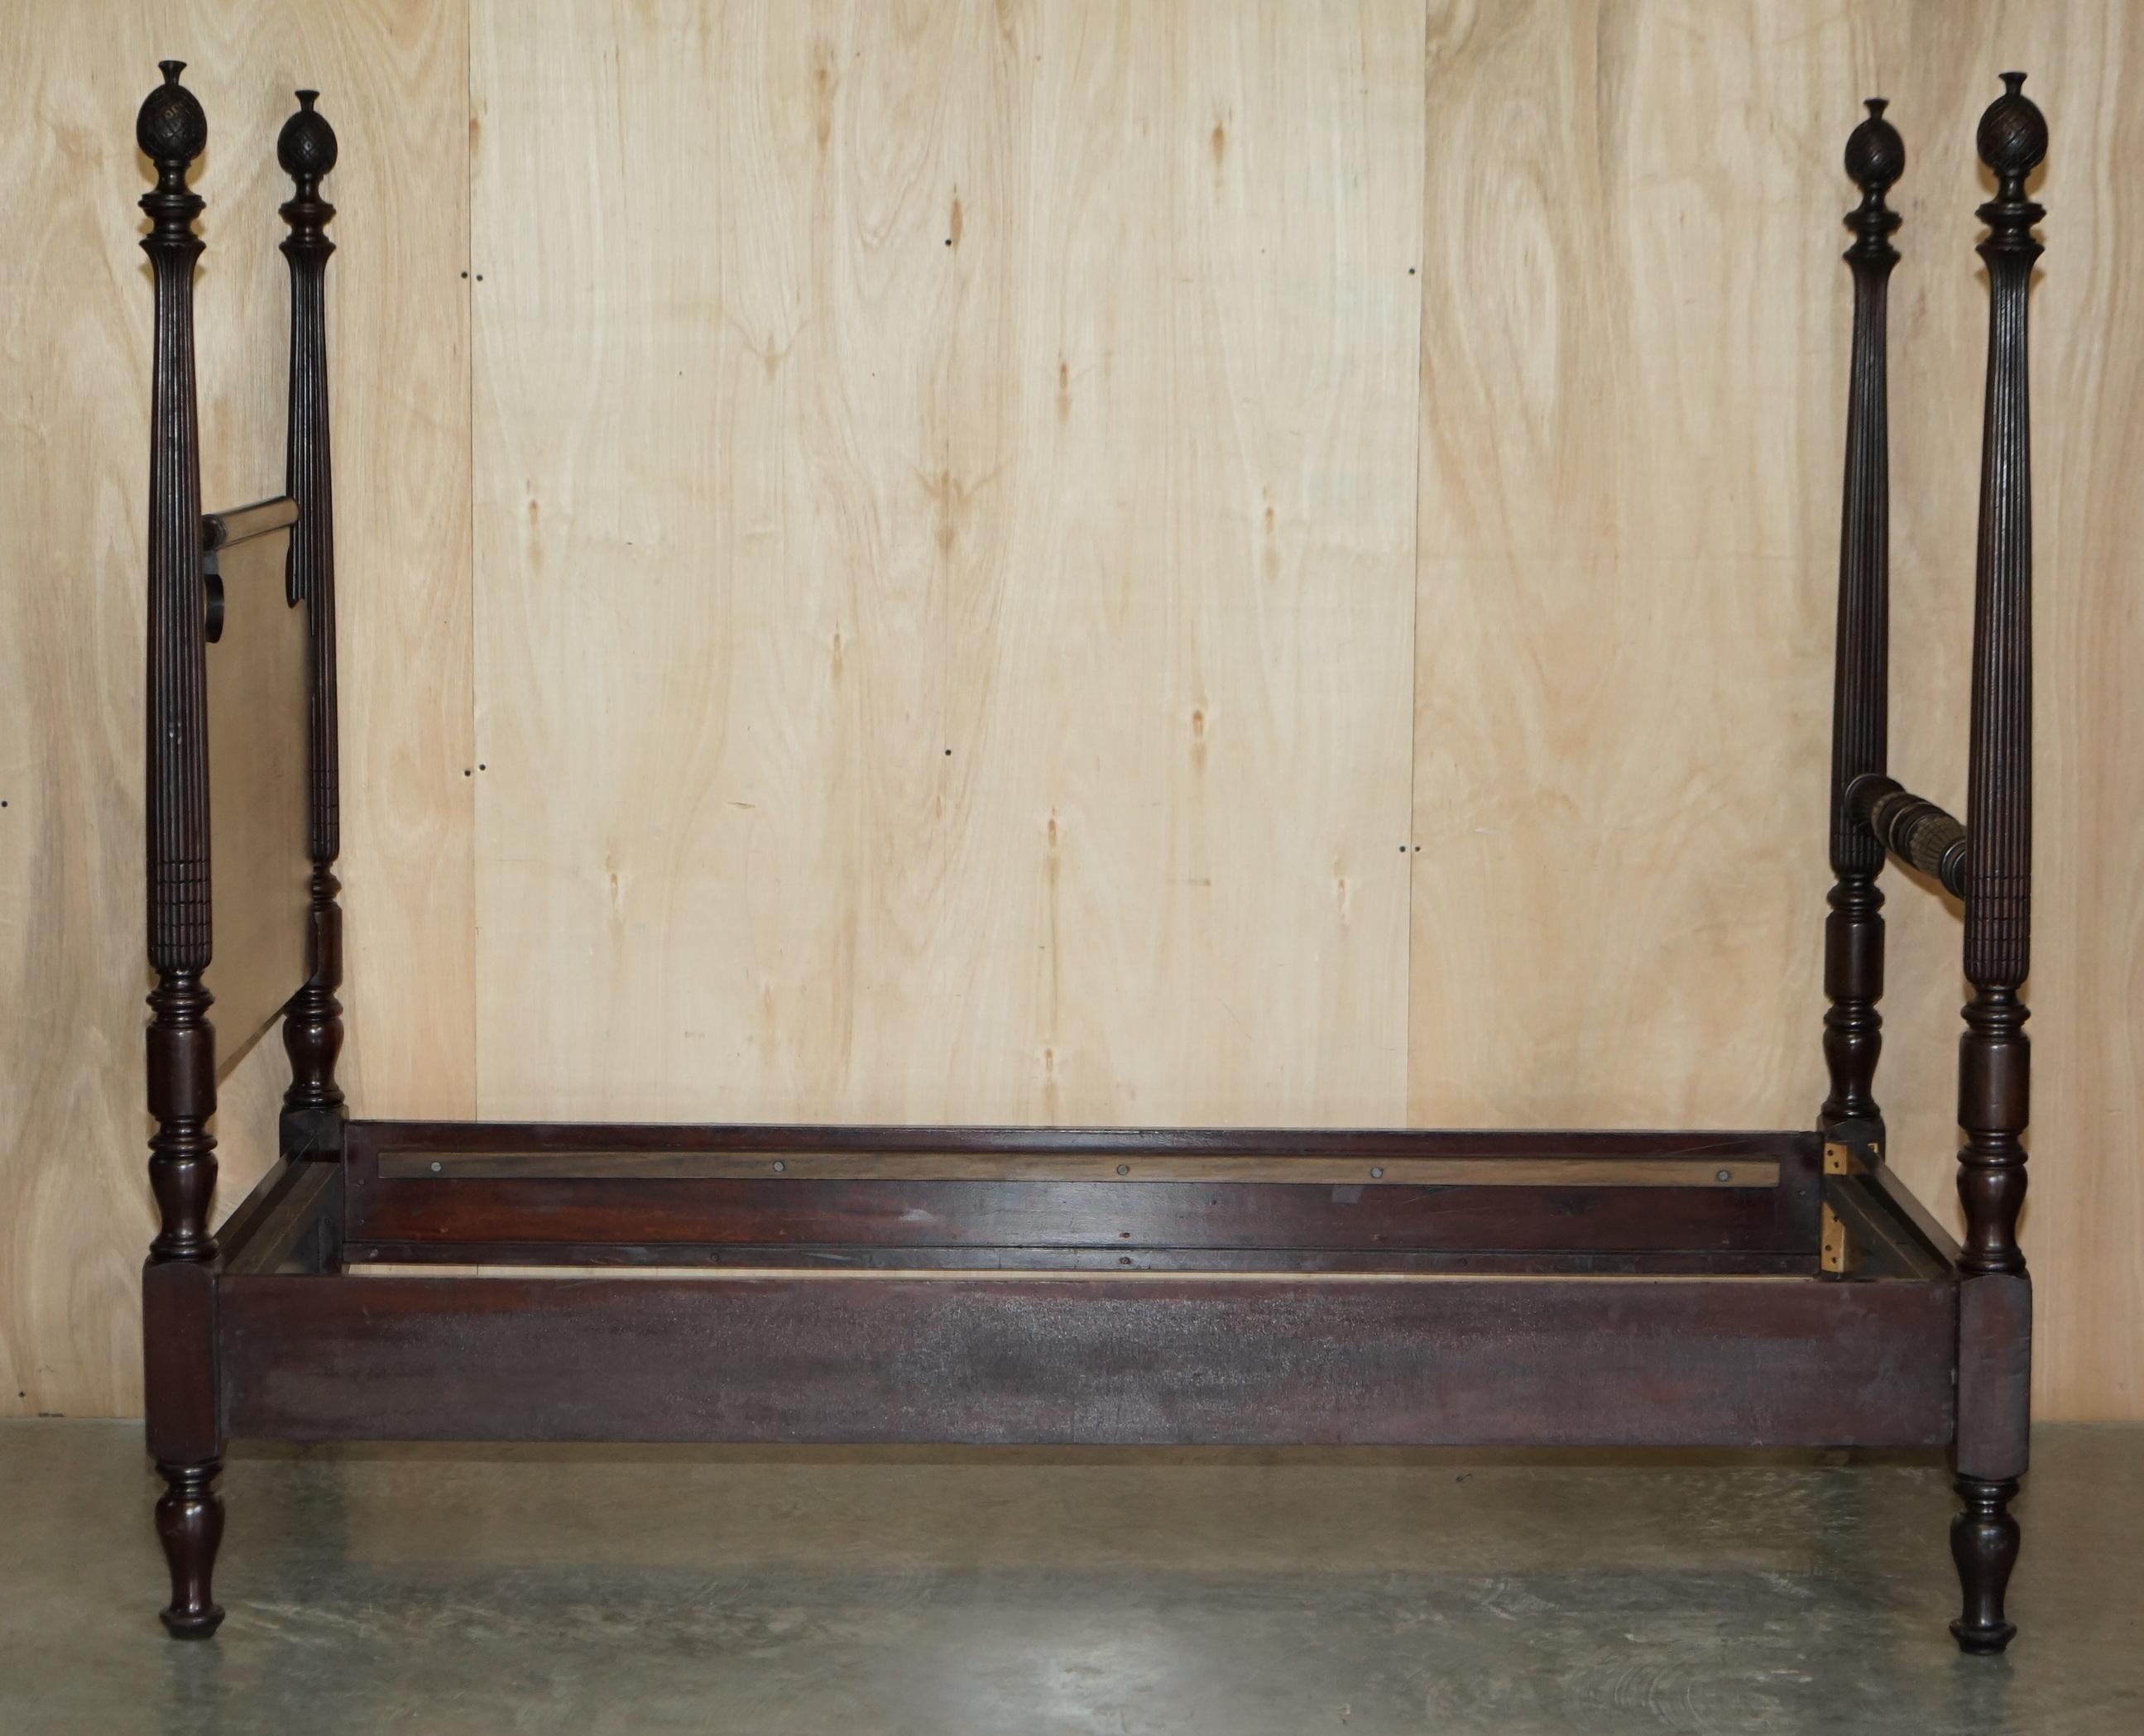 Circa 1800 American Federal Hardwood Four Poster Bed Frame with Carved Pillars For Sale 5